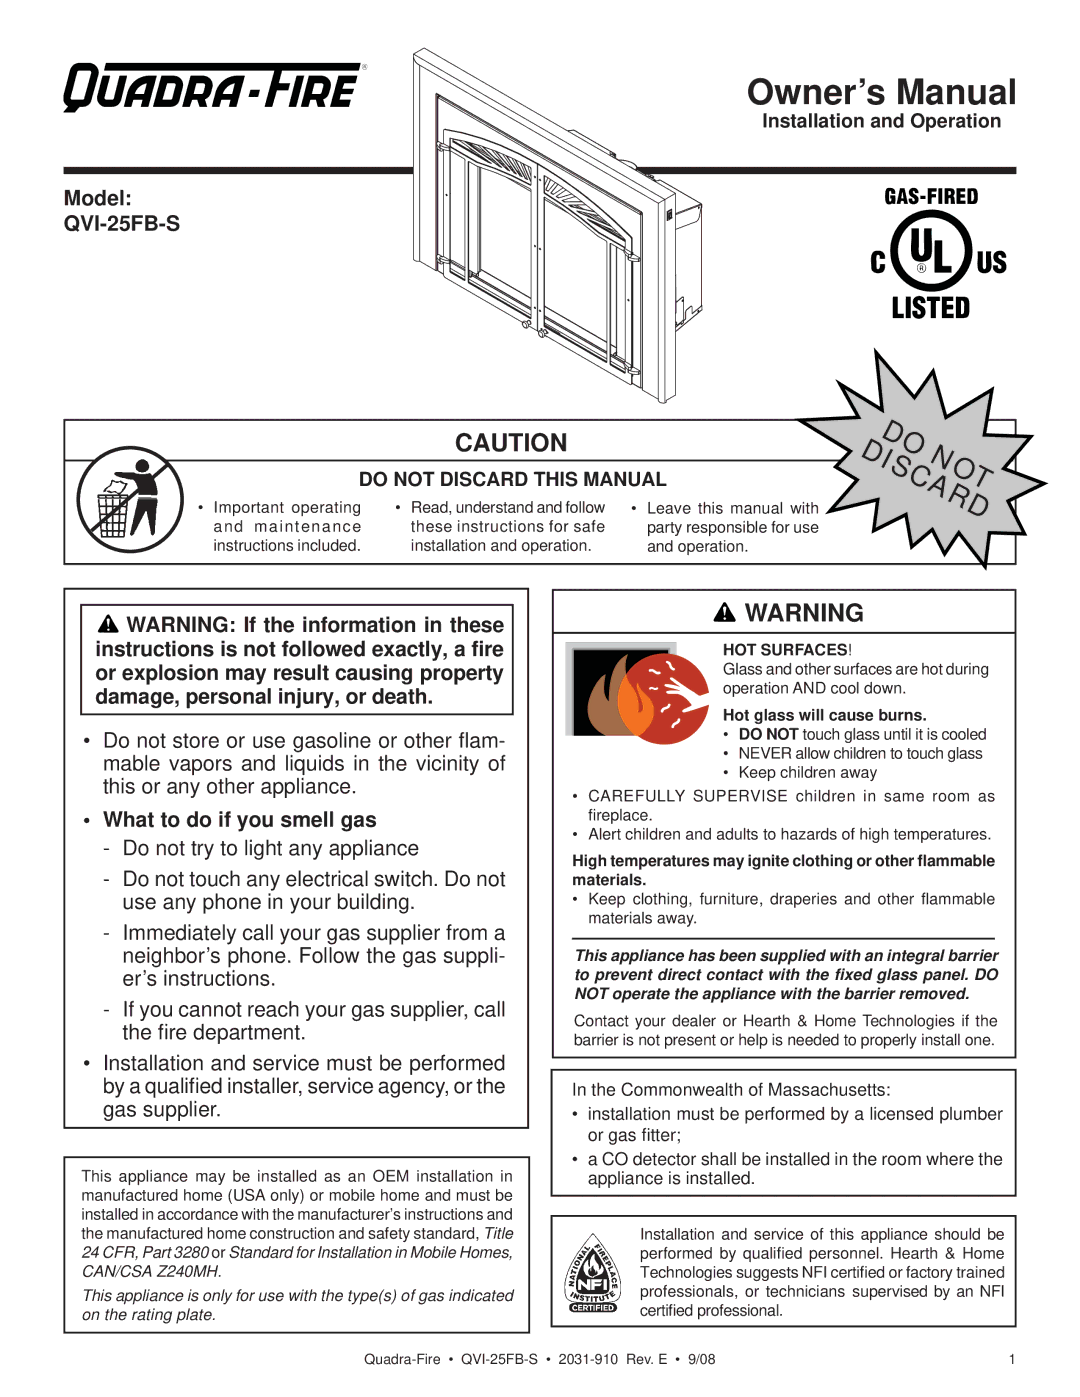 Hearth and Home Technologies QVI-25FB-S owner manual Model, What to do if you smell gas, HOT Surfaces 